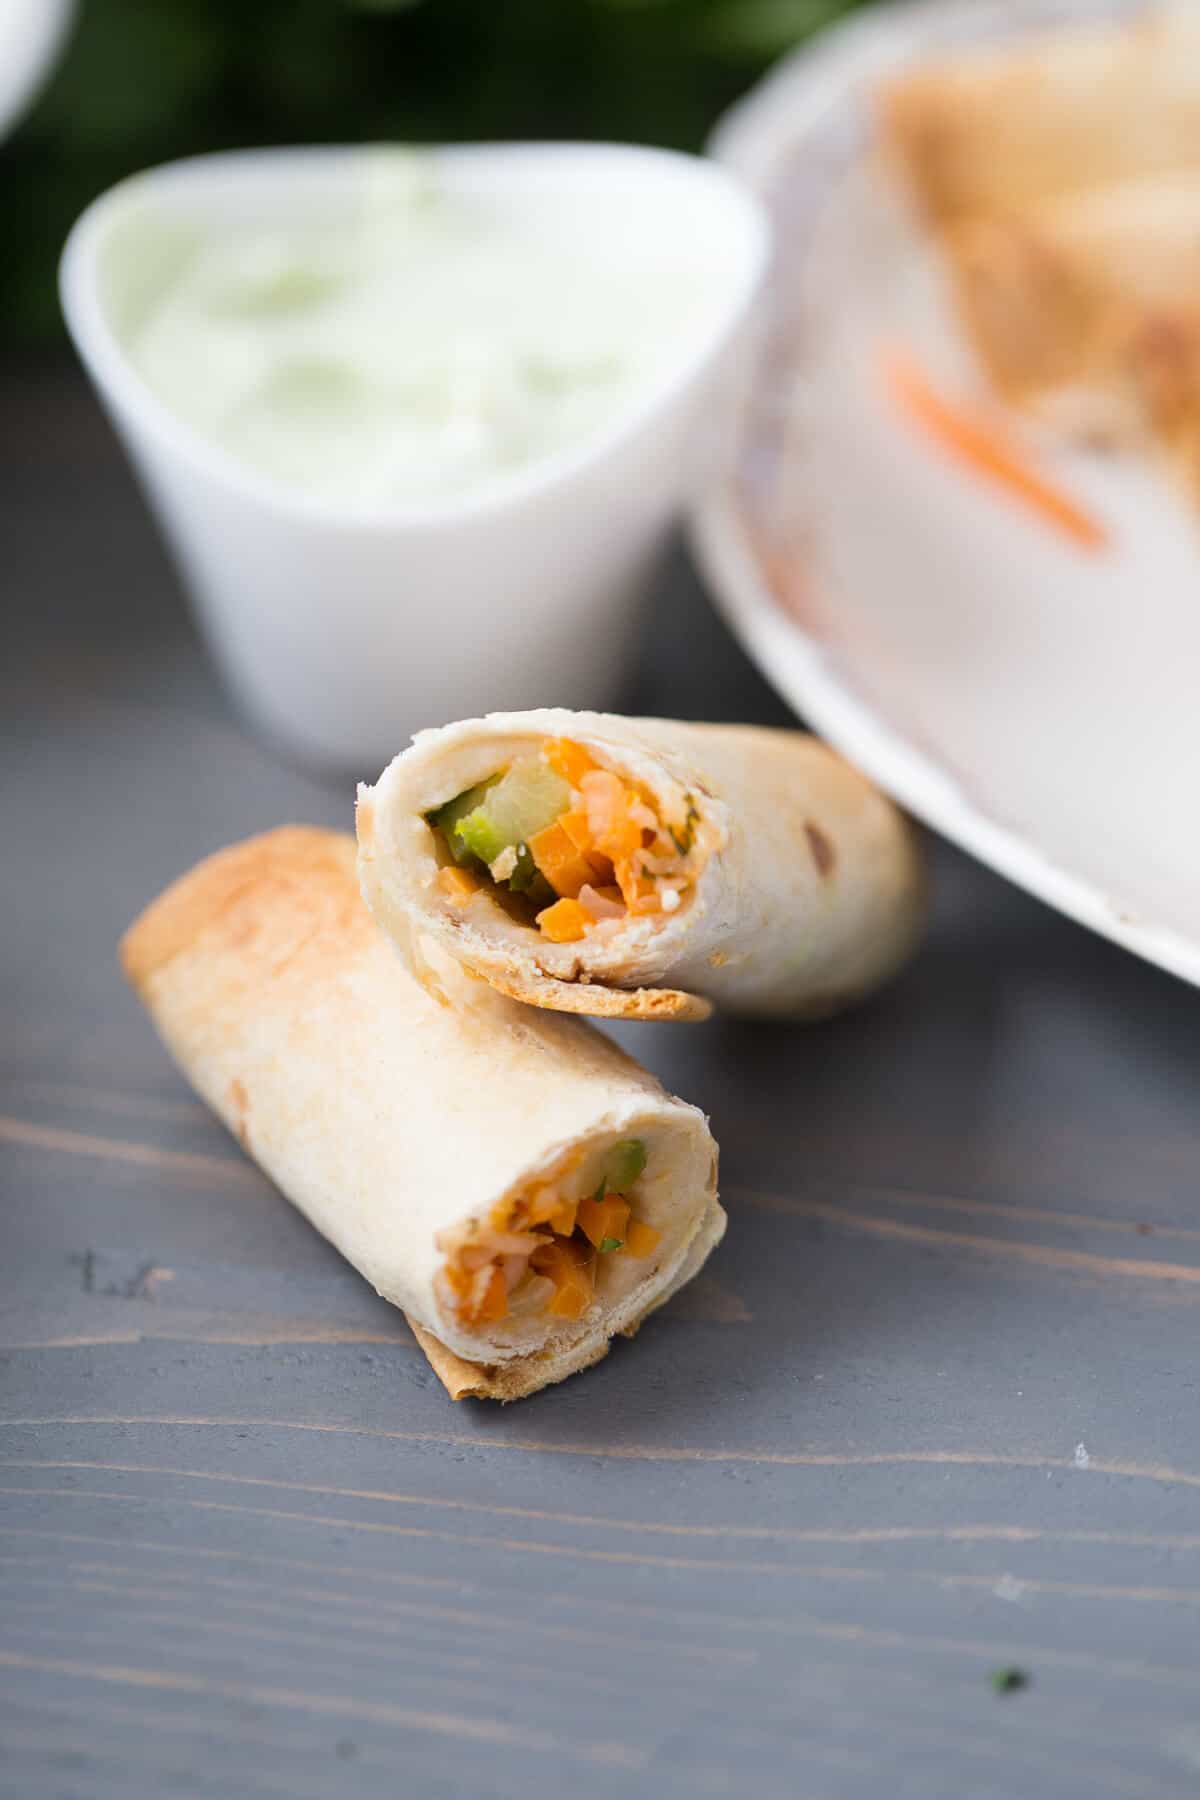 This Bahn Mi taquito is the perfect way to eat more seafood! The flavor is fresh and delicious!